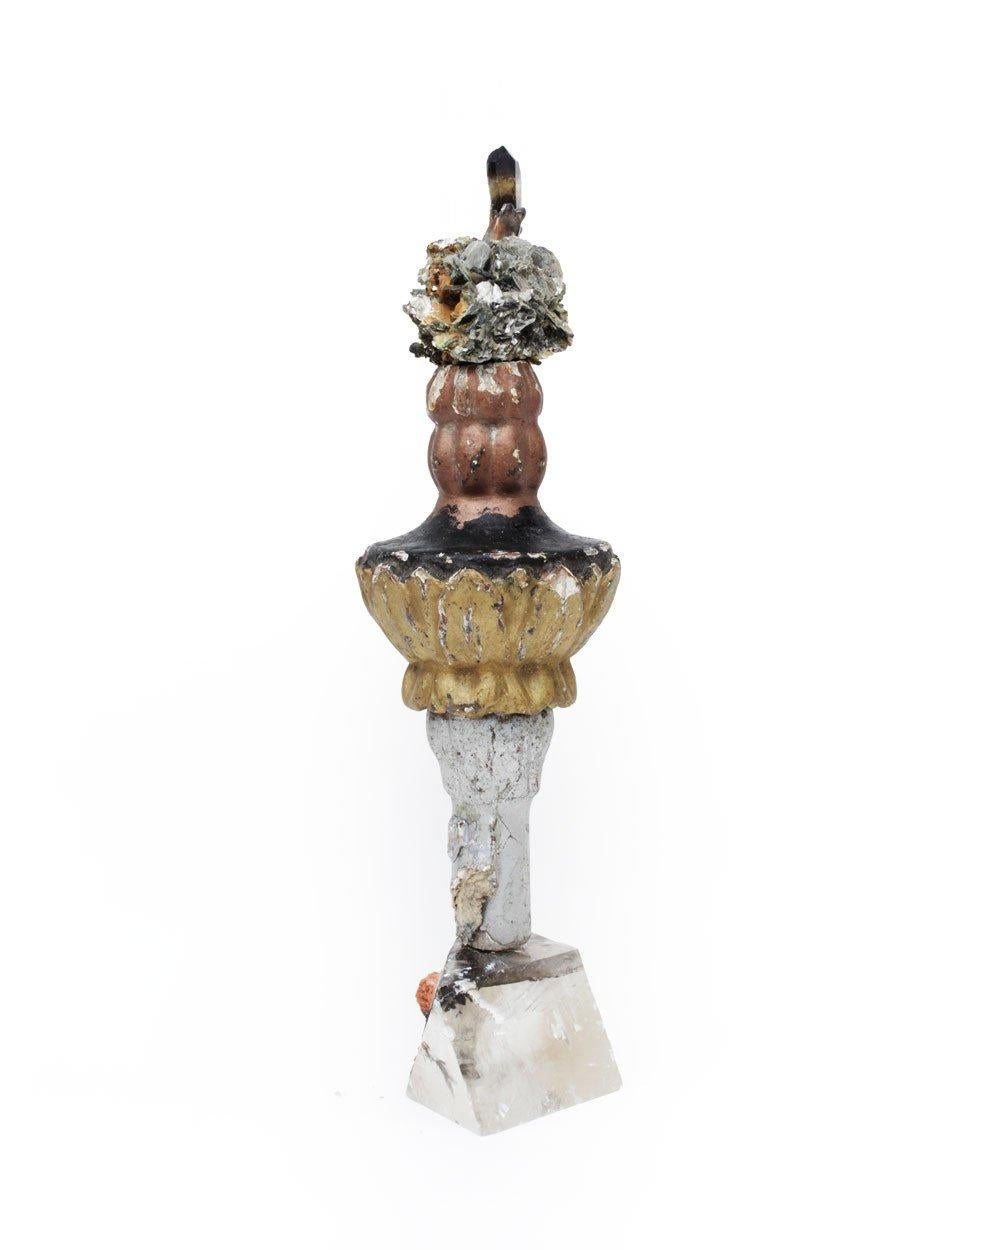 18th century Italian painted fragment decorated with mica in matrix and a Smokey lemon quartz crystal on a phantom optical calcite base.

The 18th century fragment is hand carved and painted and originally came from a church in Venice. It is put